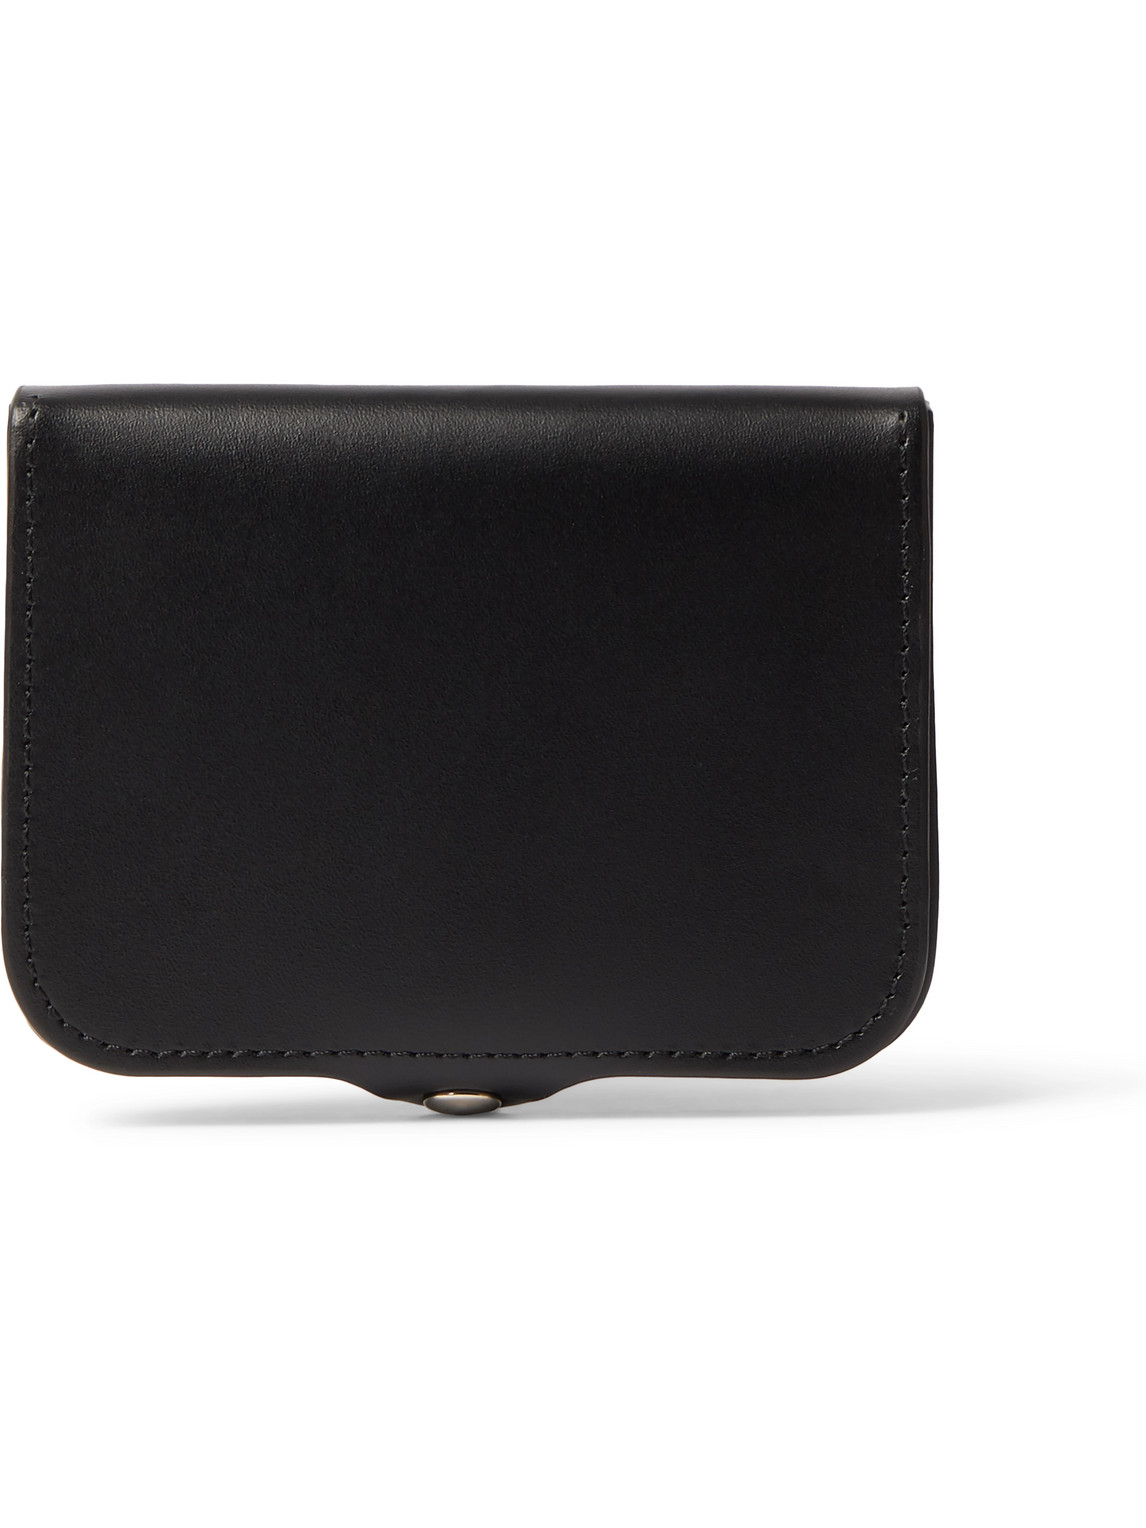 Apc Josh Leather Coin And Cardholder In Black